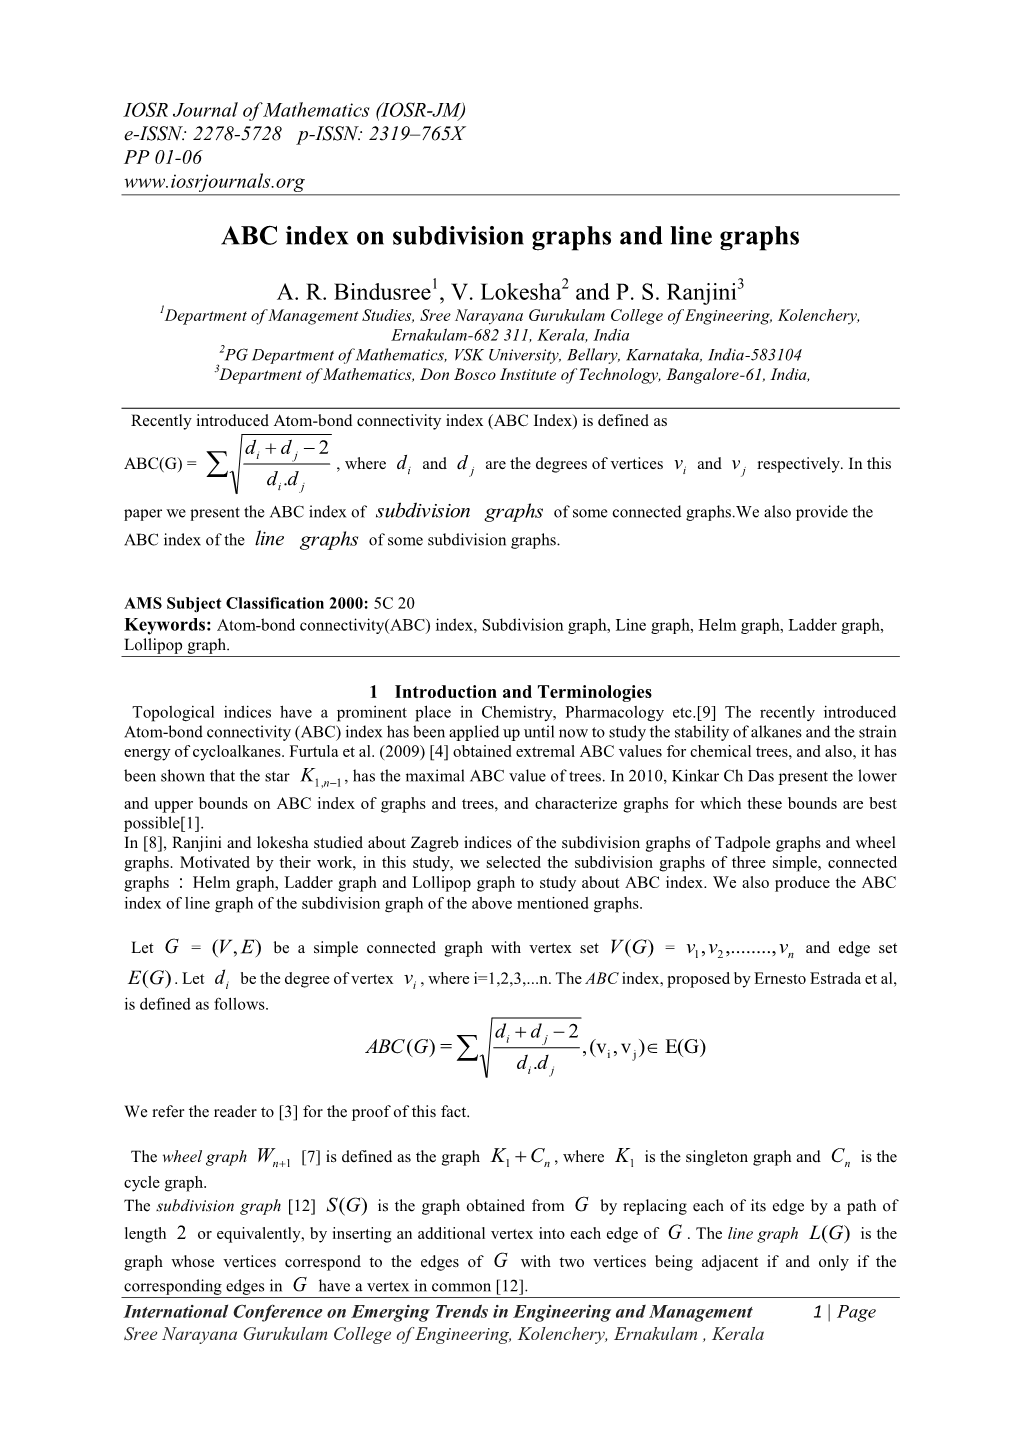 ABC Index on Subdivision Graphs and Line Graphs